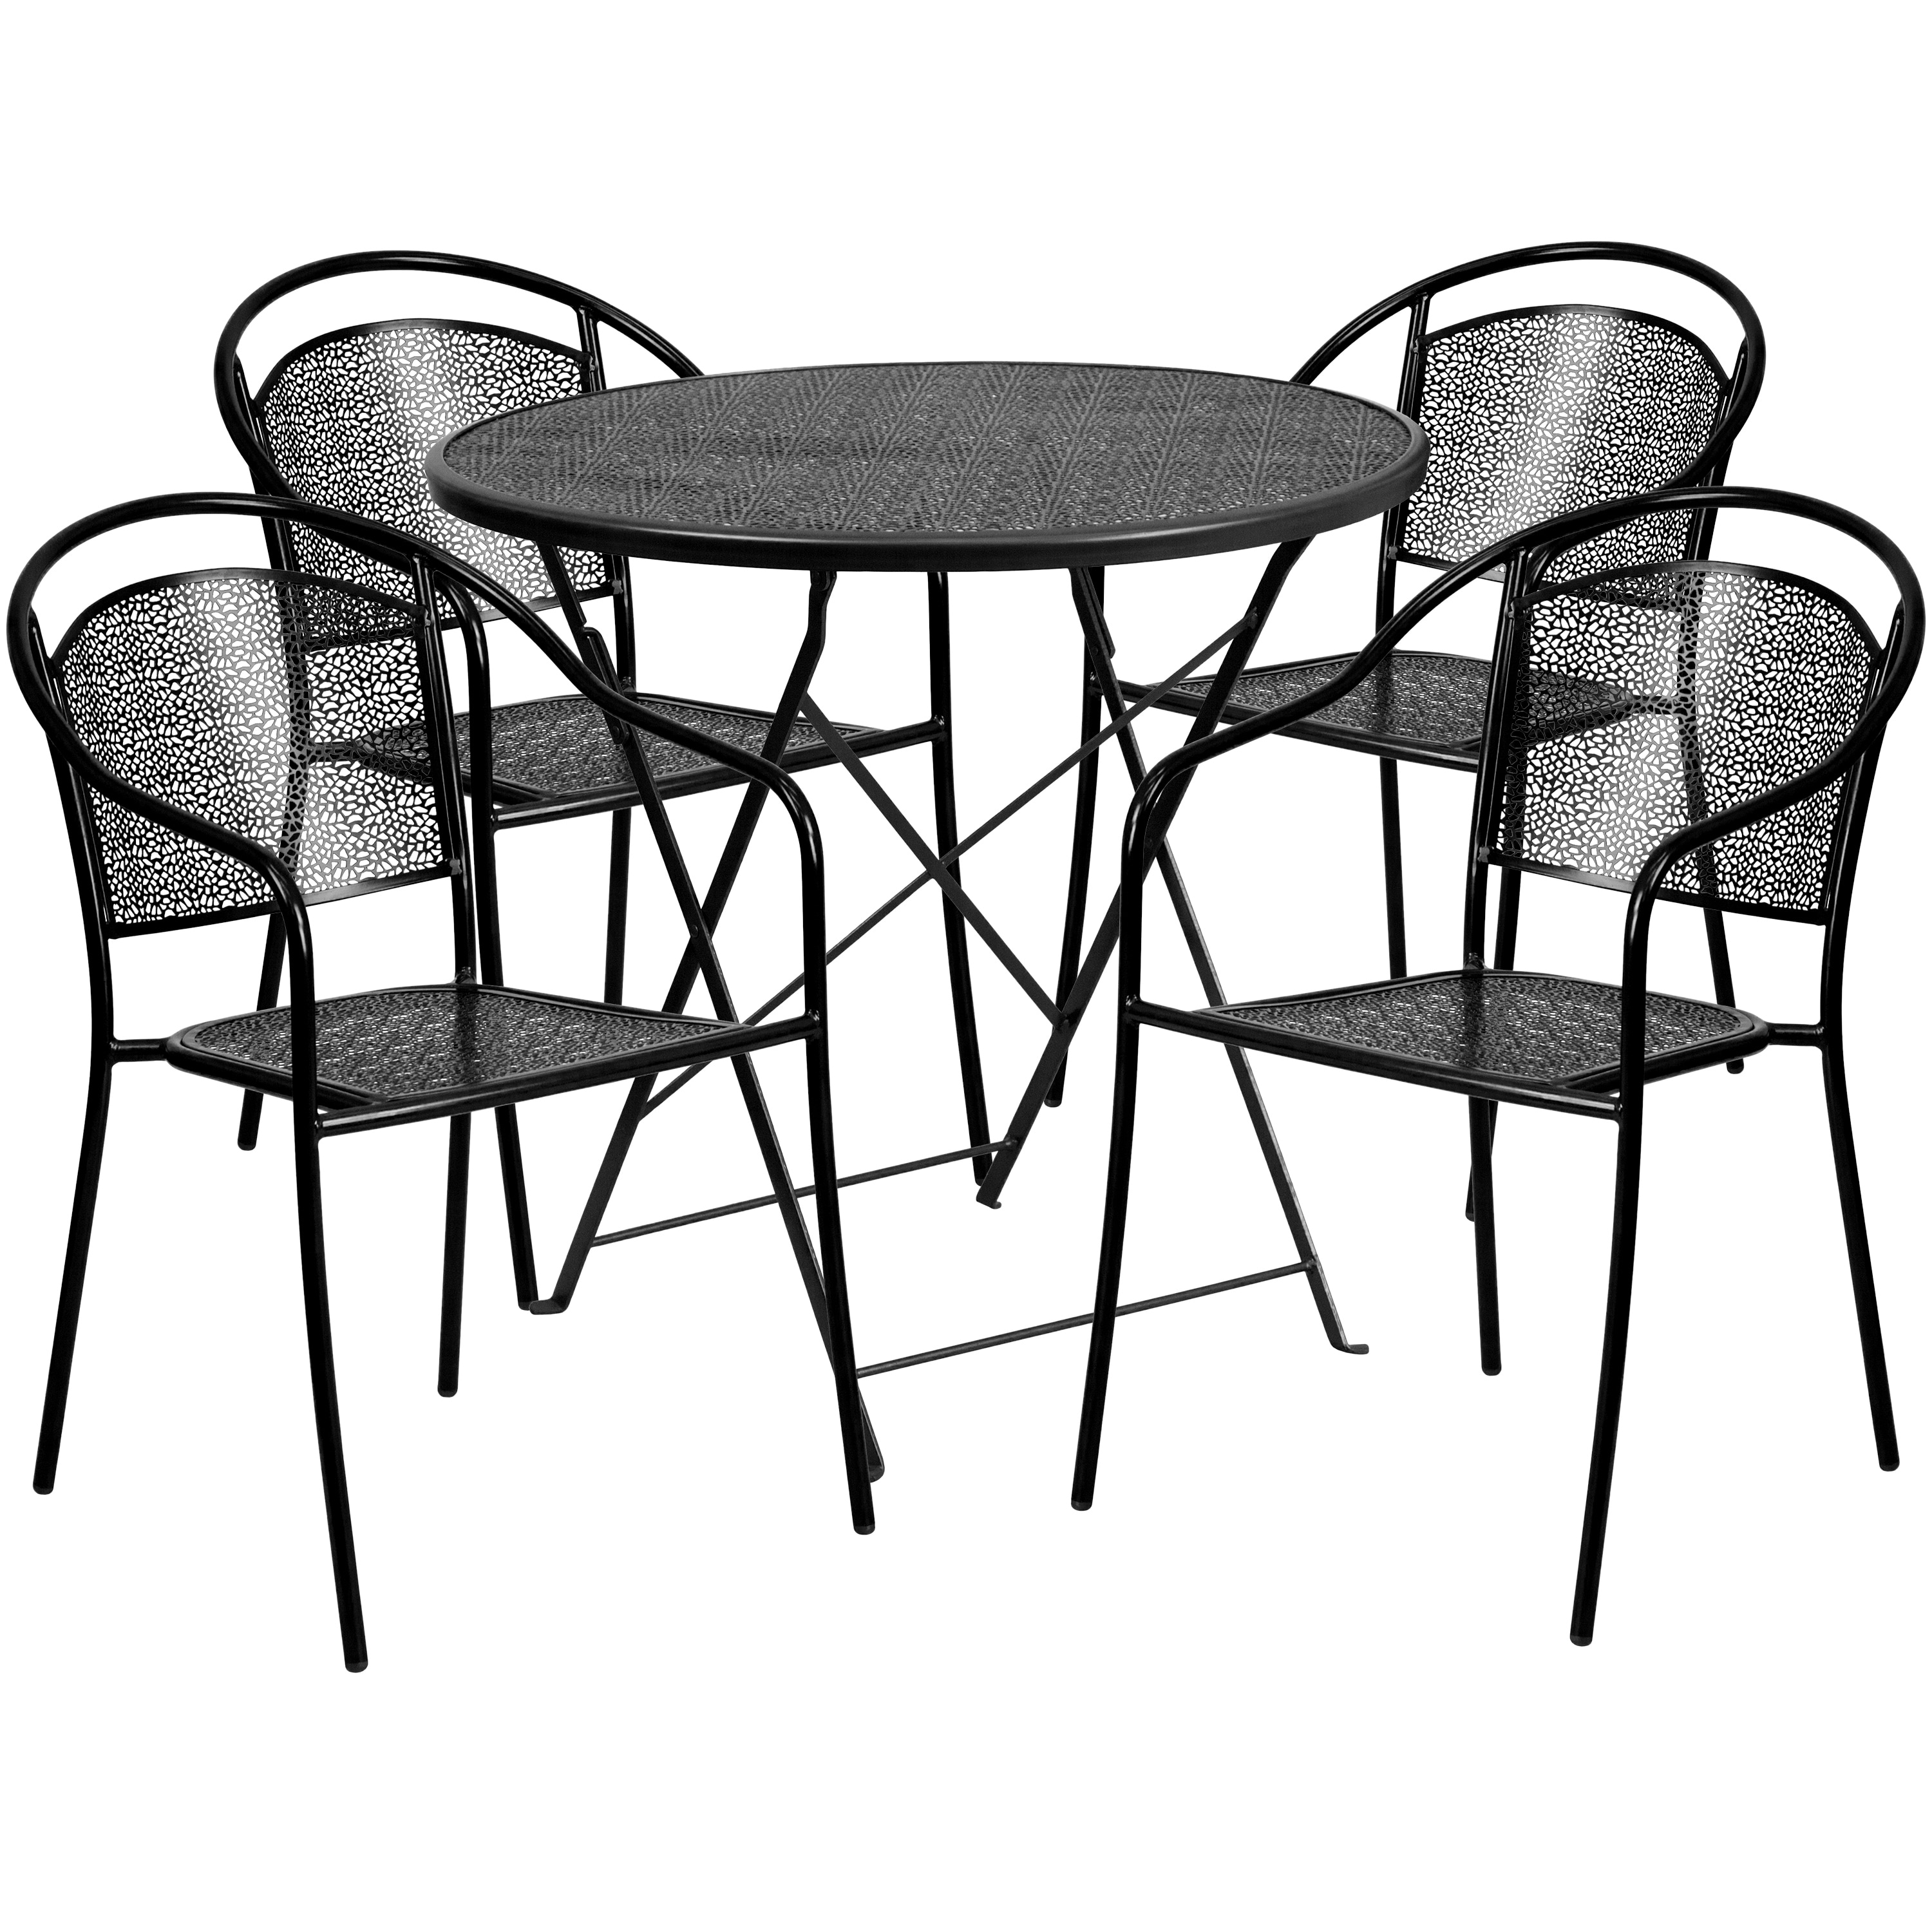 Flash Furniture 30-in. Round Steel Folding Patio Table Set w/ 4 Chairs Black - image 4 of 5